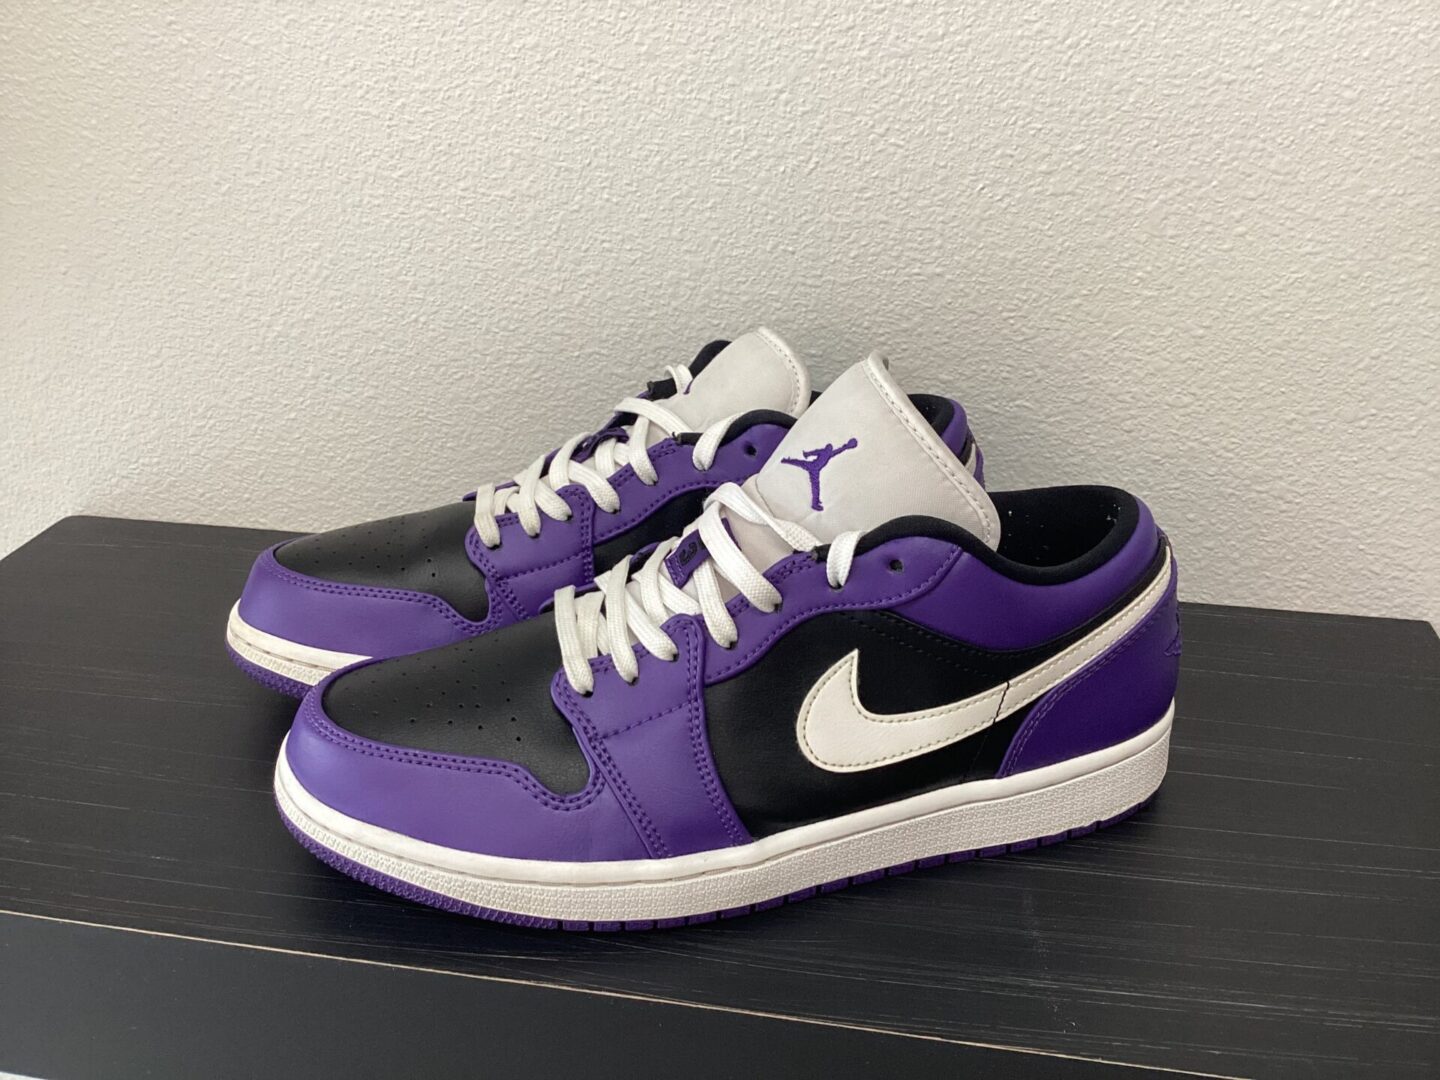 A pair of purple and black sneakers with white laces and a white Pre owned-Jordan 1 Low swoosh logo on a gray shelf.